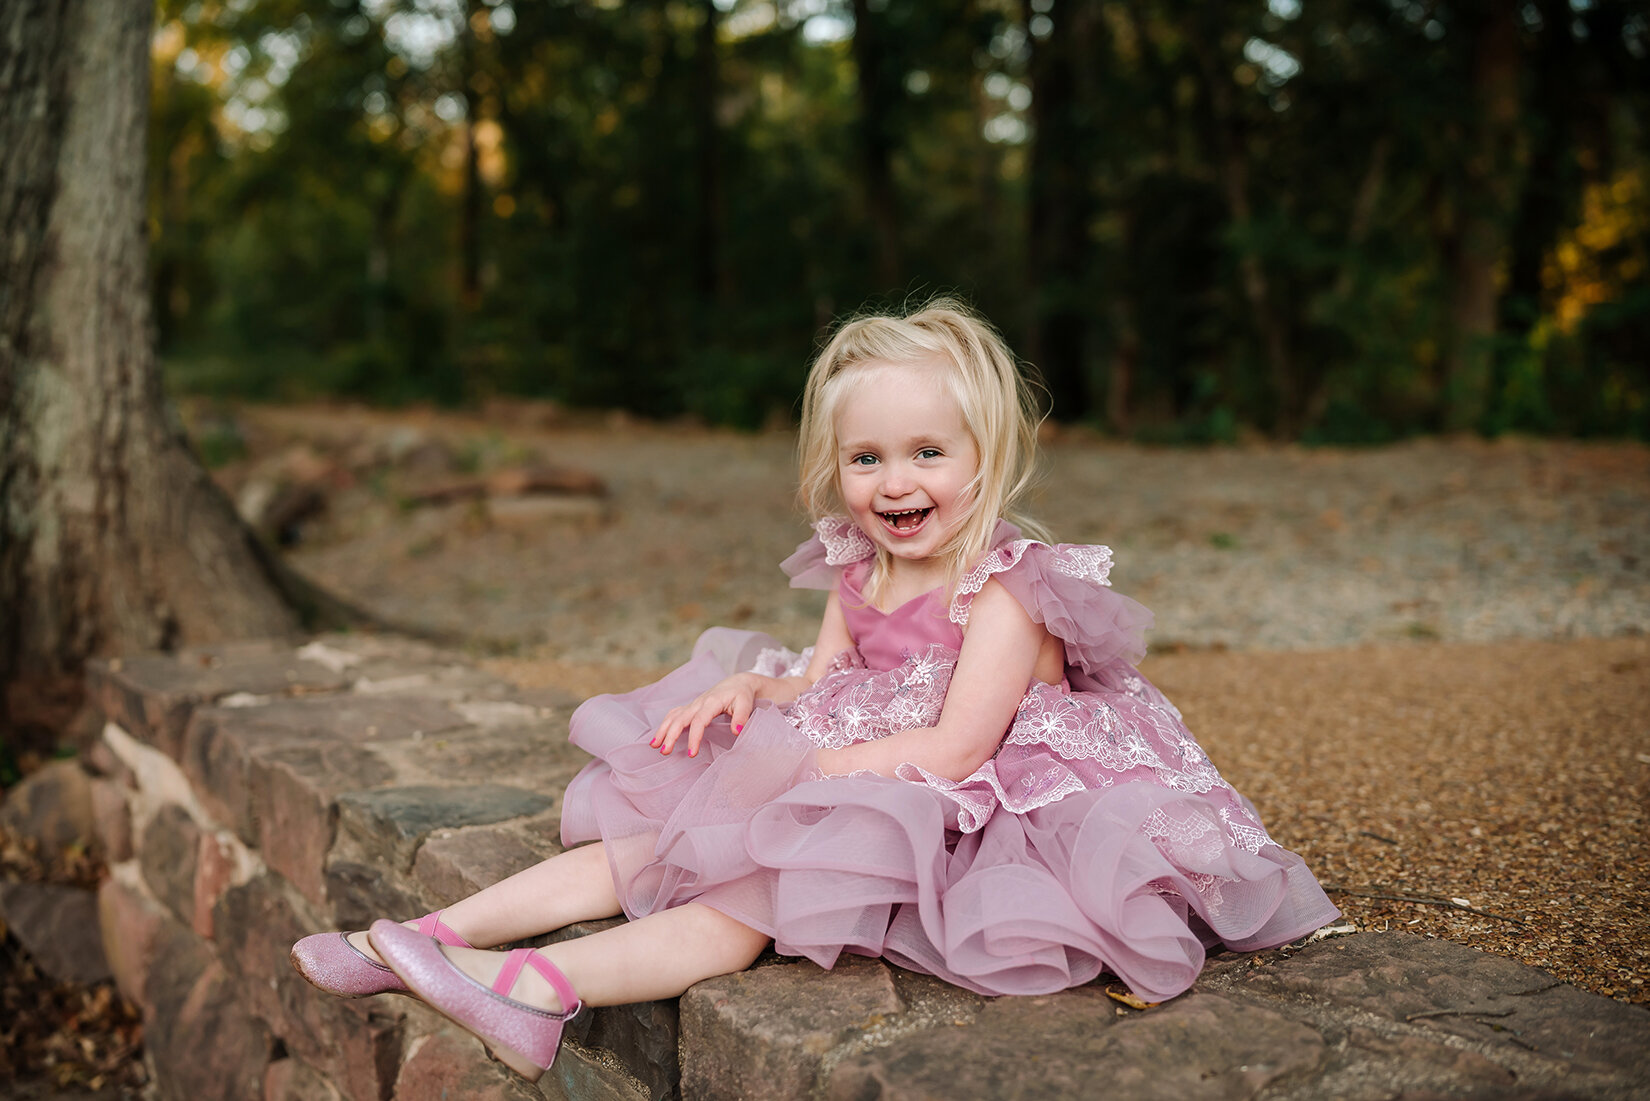 three year old portrait session of girl in beautiful rental gown.jpg